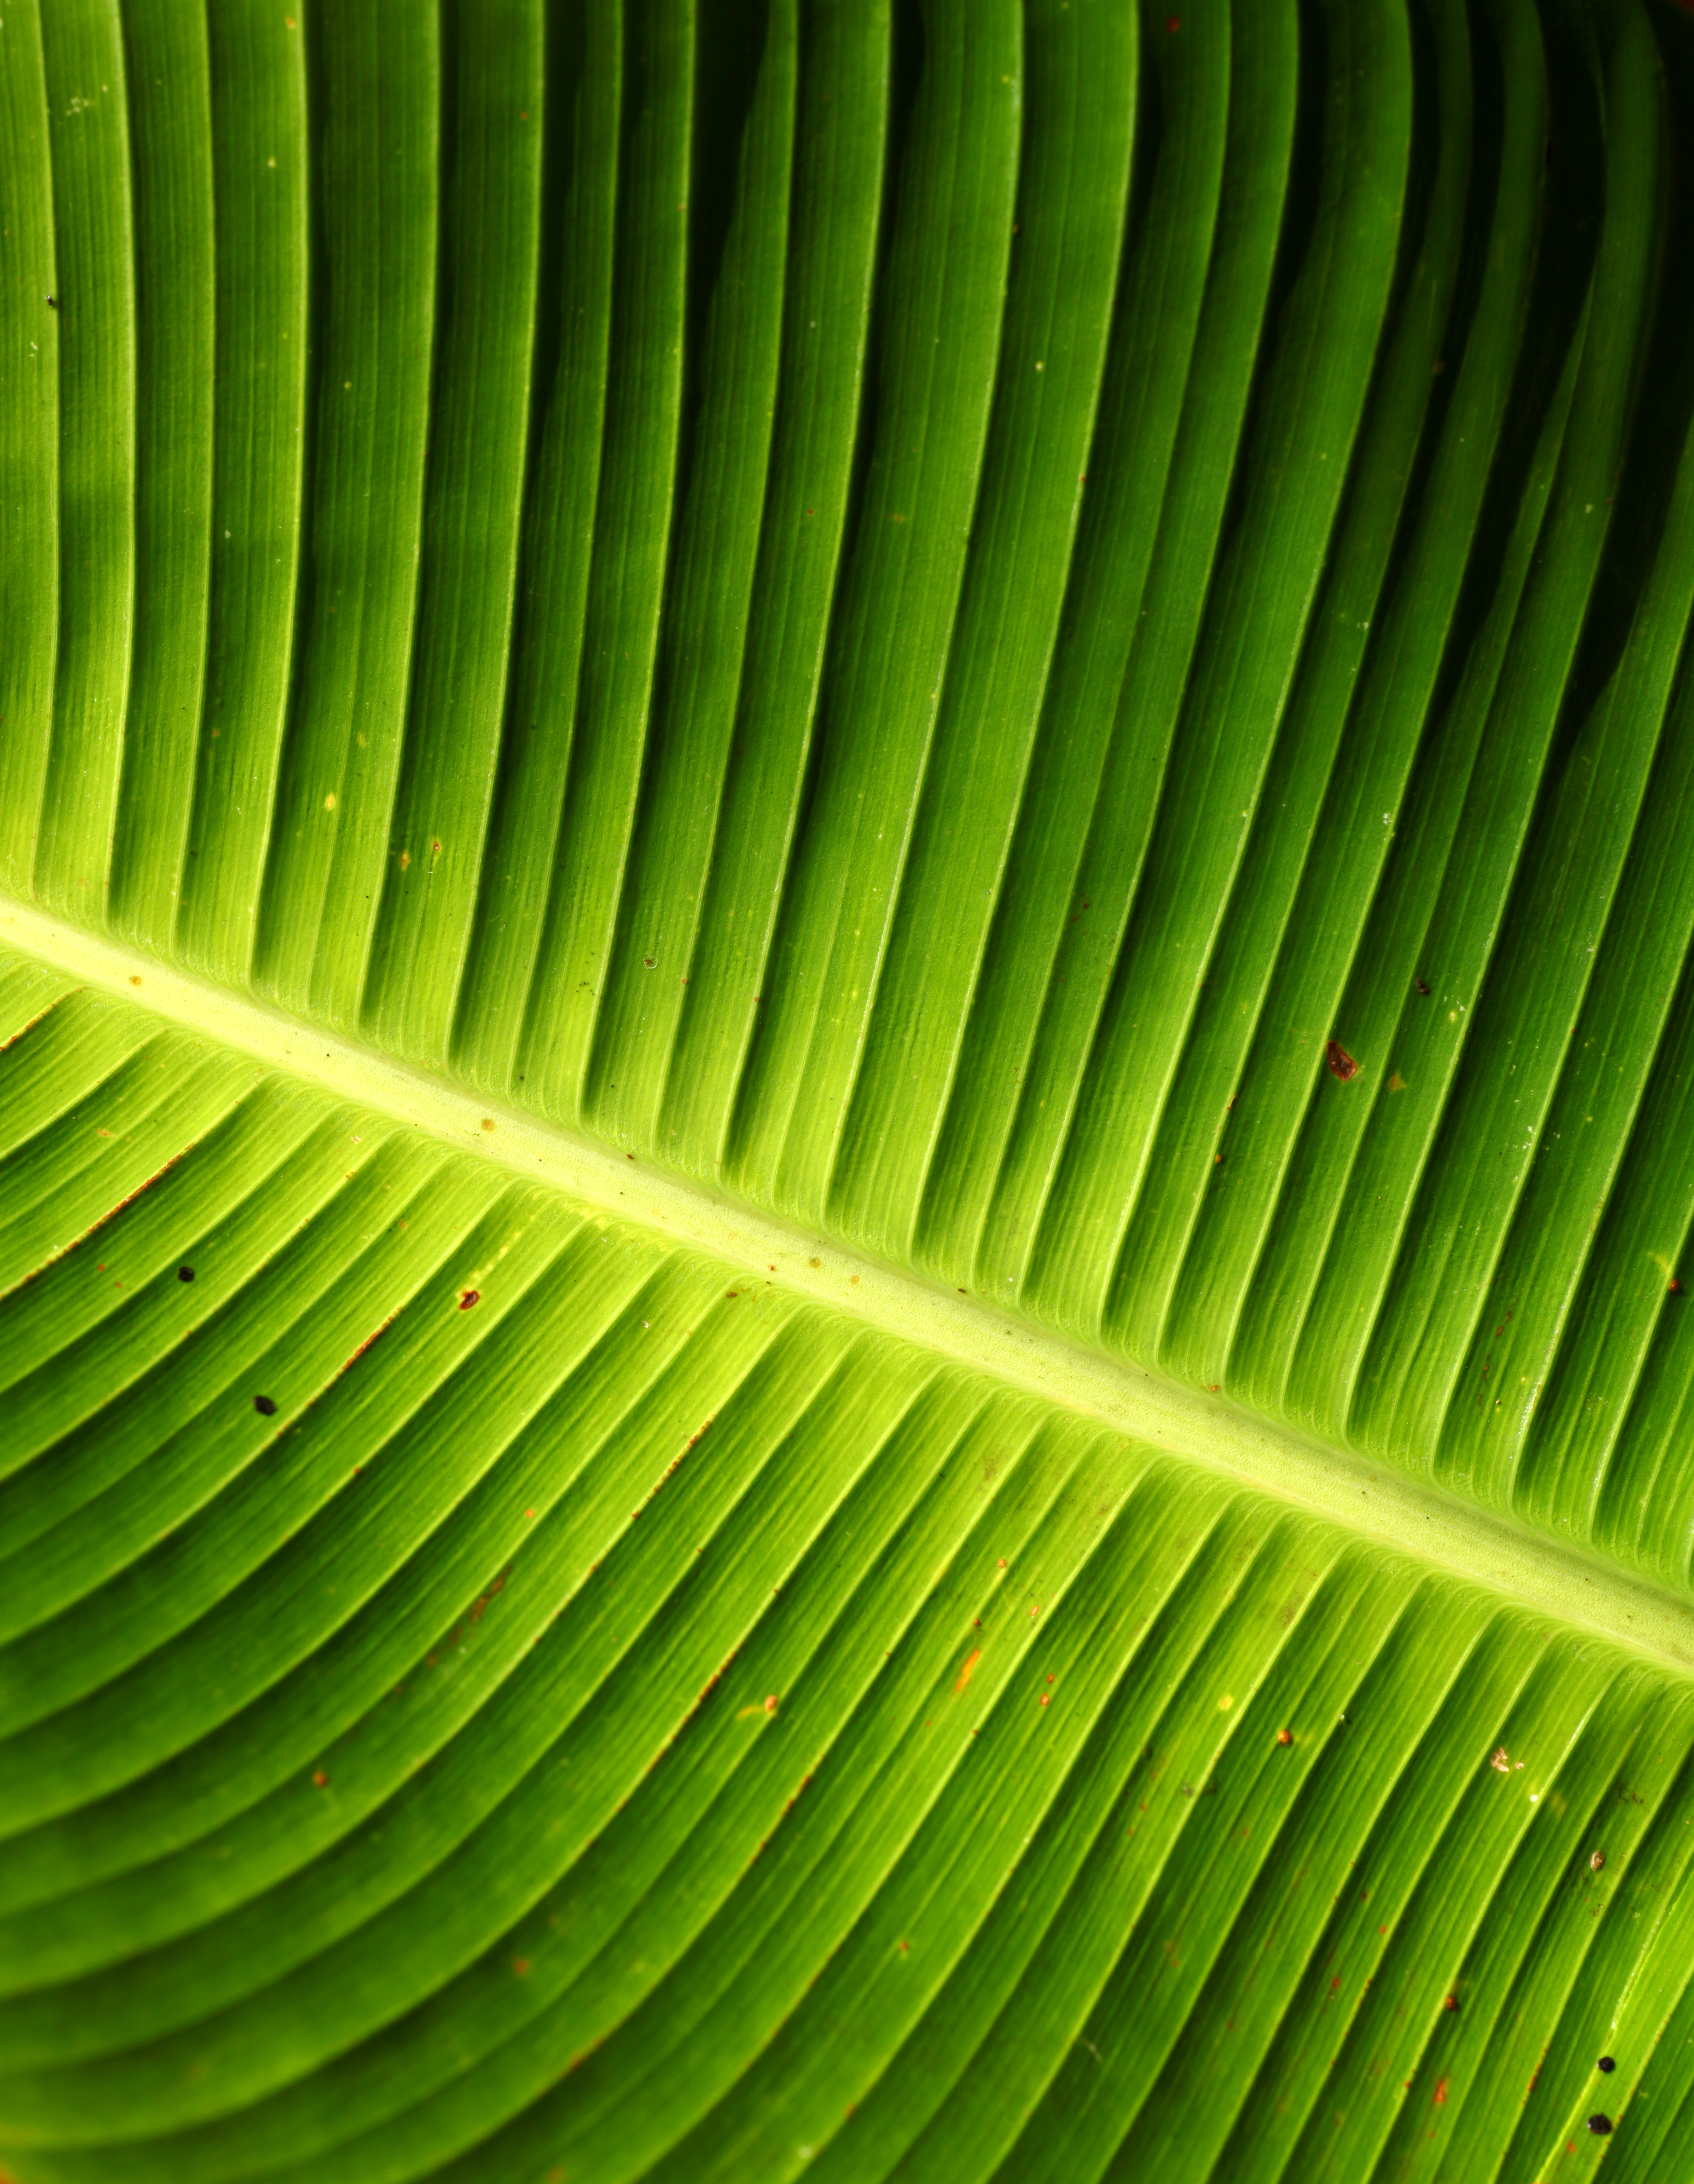 Green Leaf Texture, Agriculture, Organic, Growth, Healthy, HQ Photo